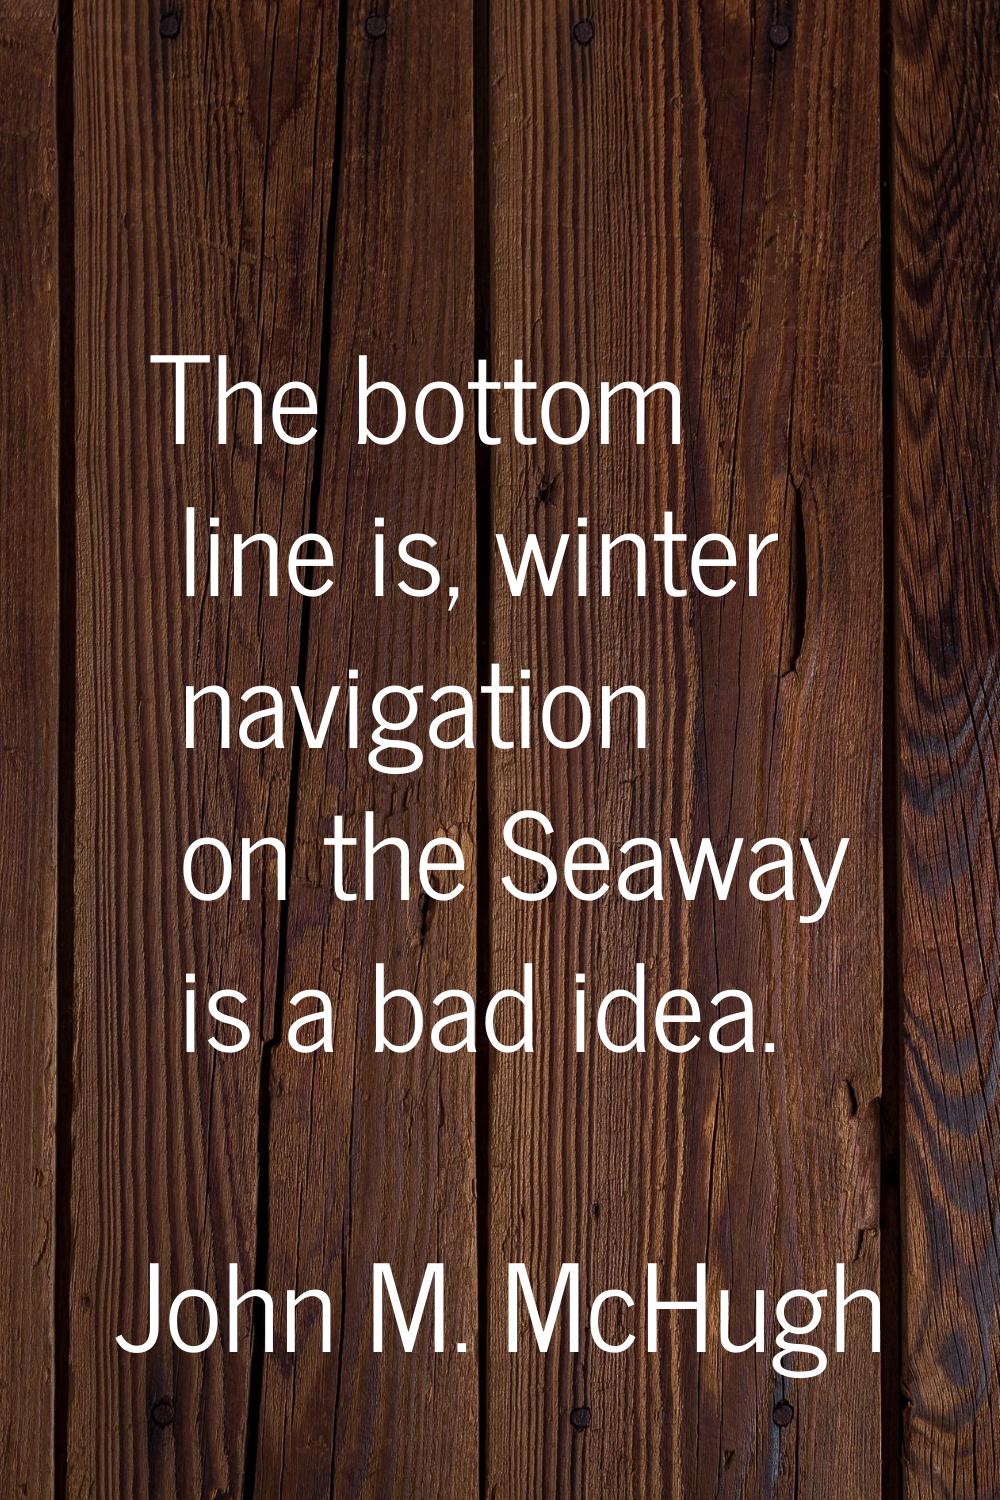 The bottom line is, winter navigation on the Seaway is a bad idea.